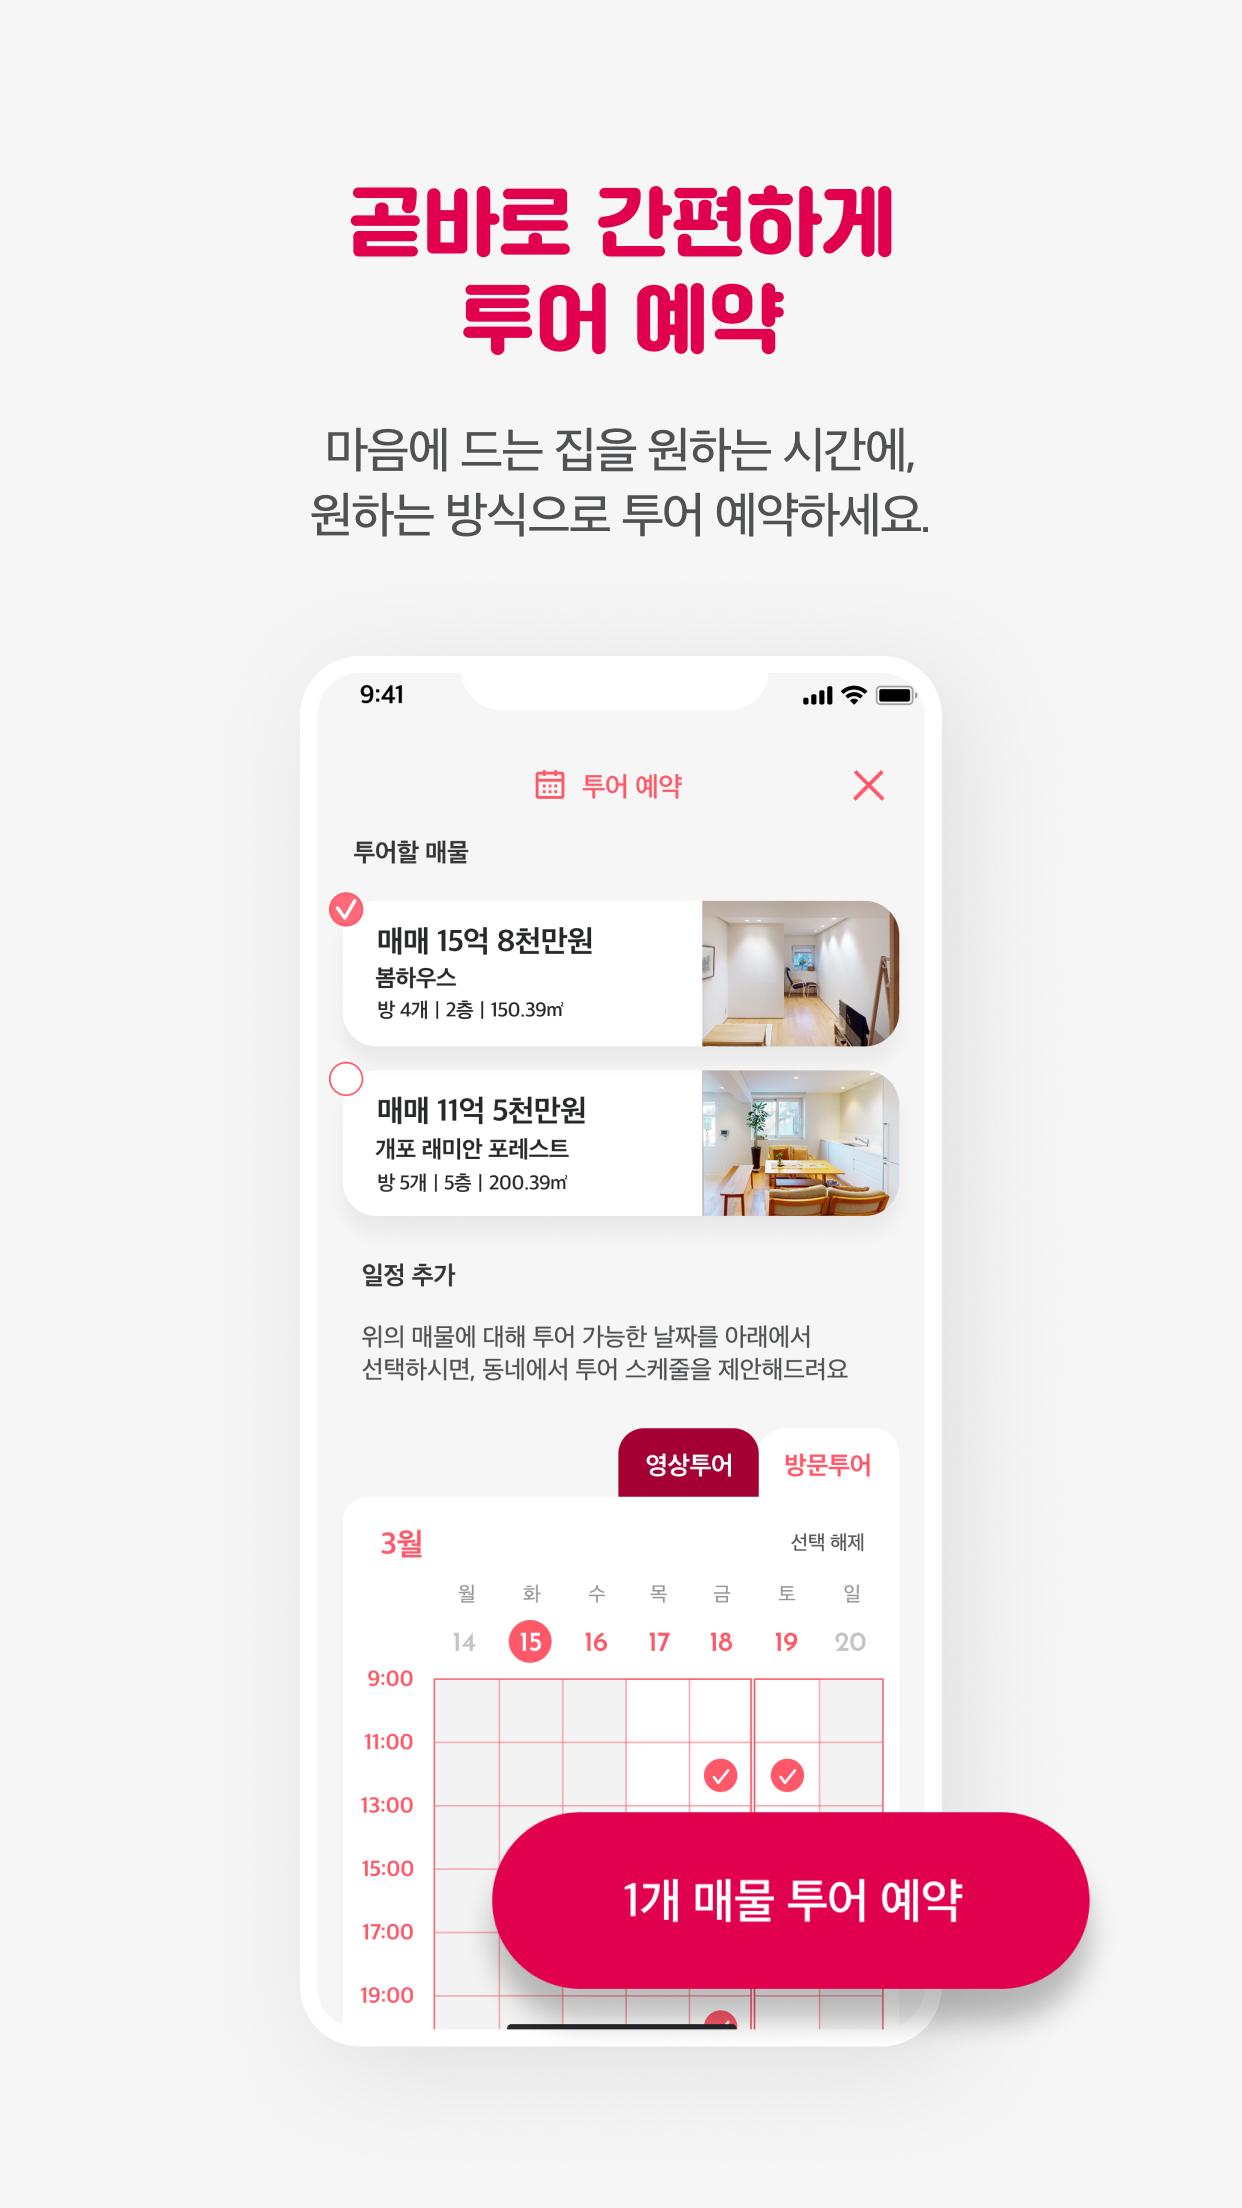 Dongnae Real Estate: Find Your Home 1.0.2 Screenshot 4